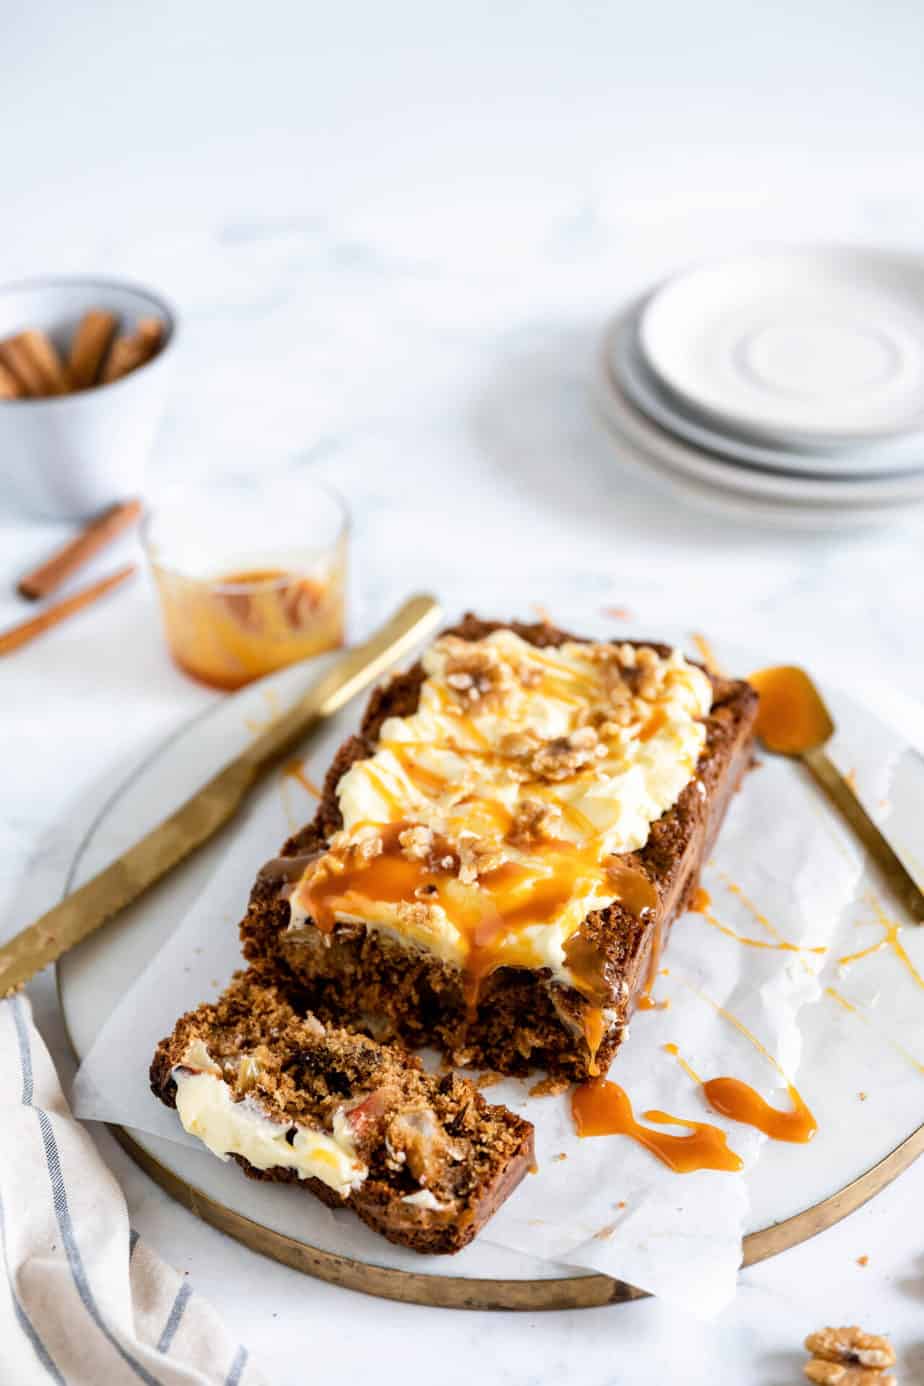 A apple and walnut loaf topped with creamy frosting and a drizzle of caramel sauce on a marble board.